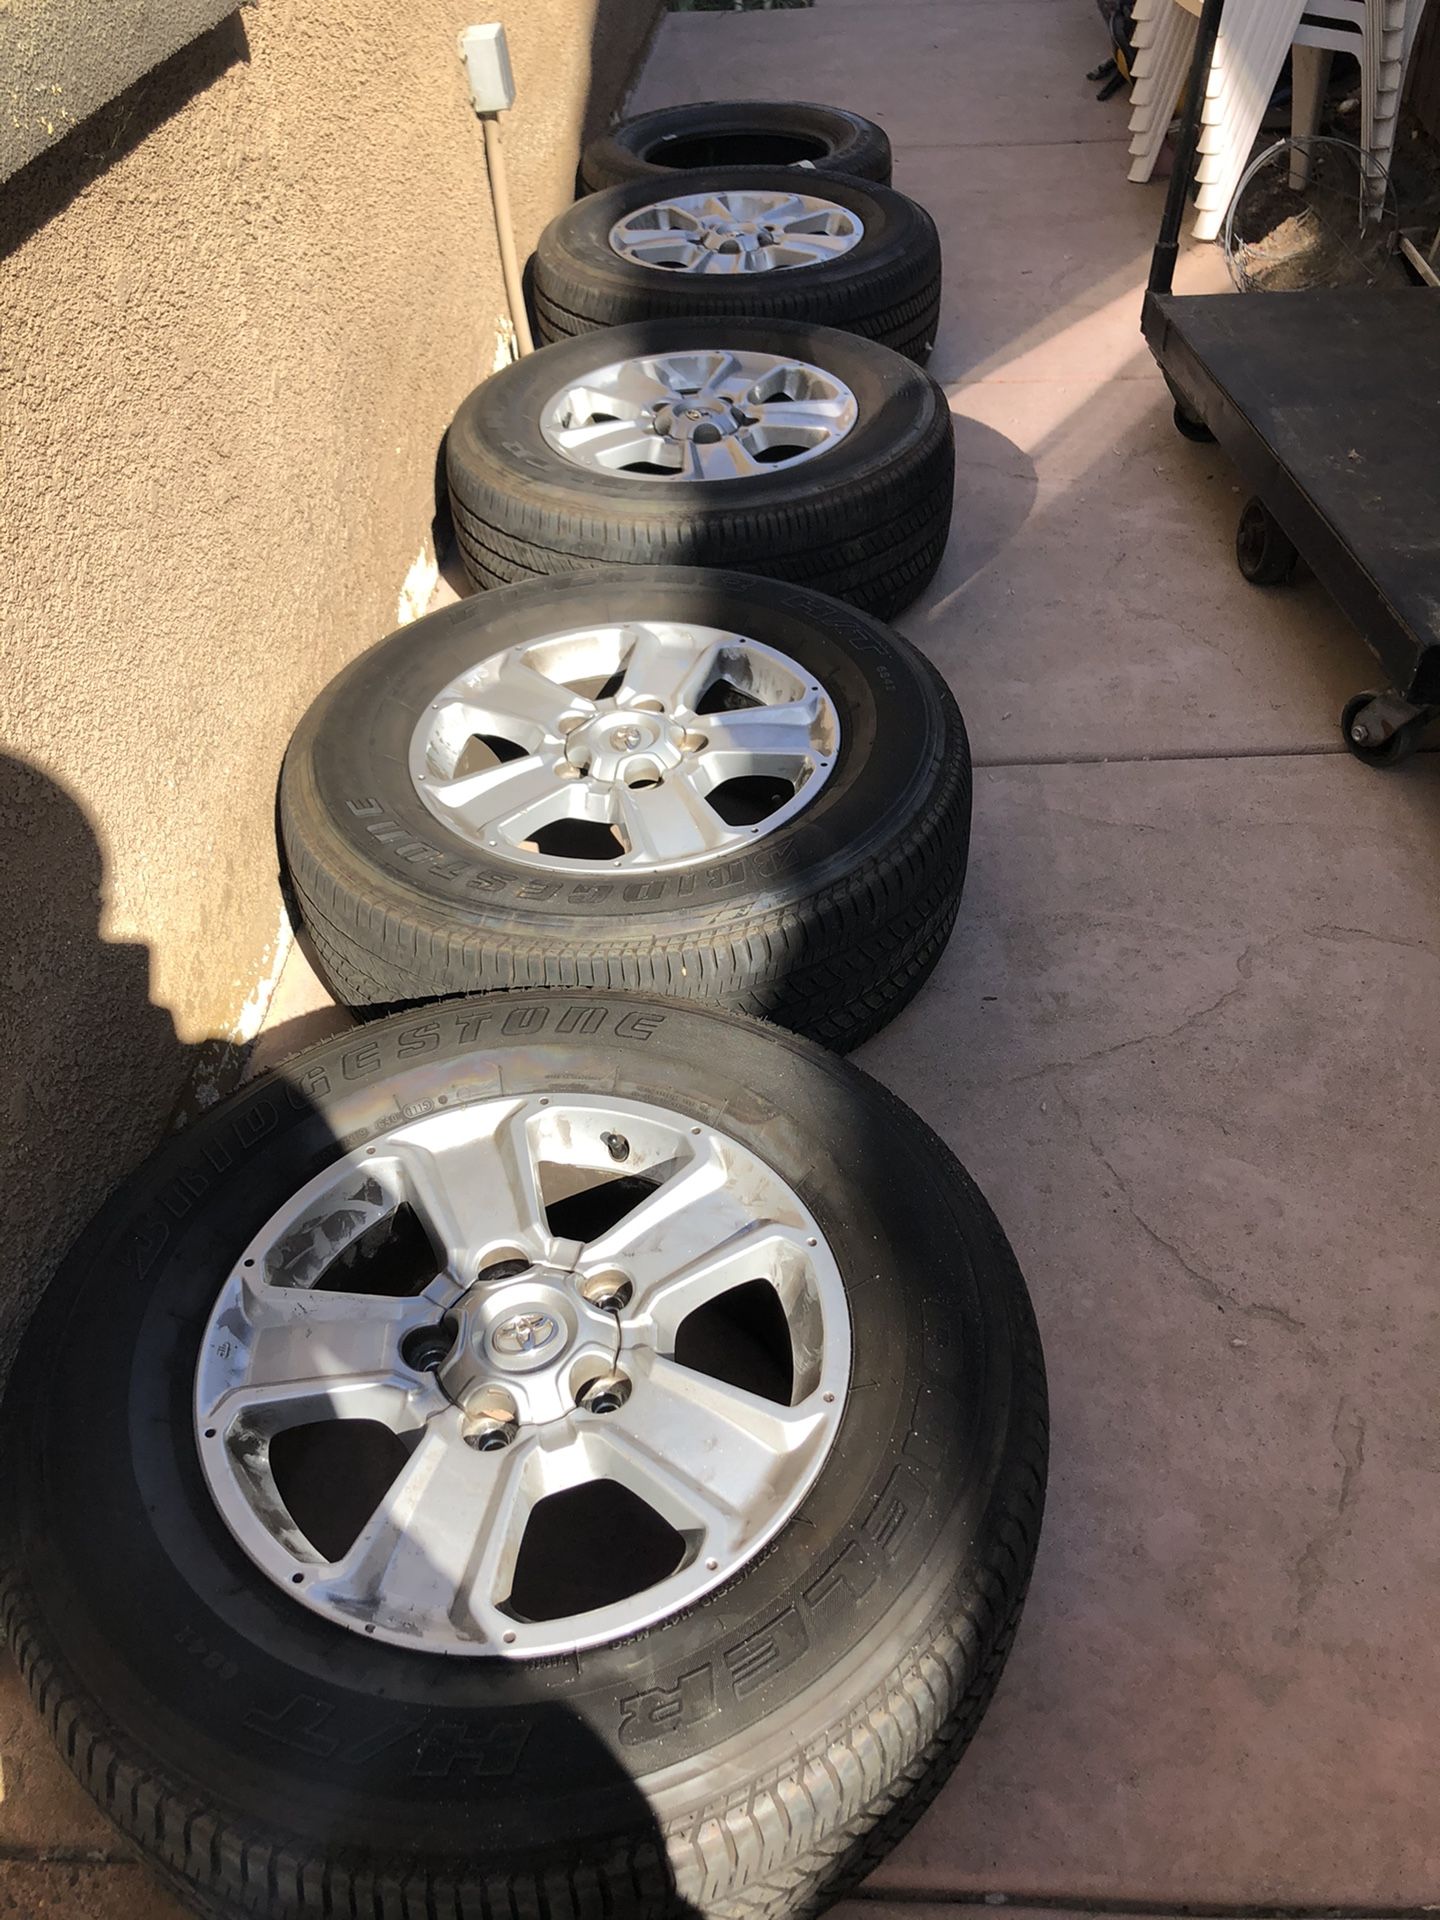 Toyota Tundra rims and tires.